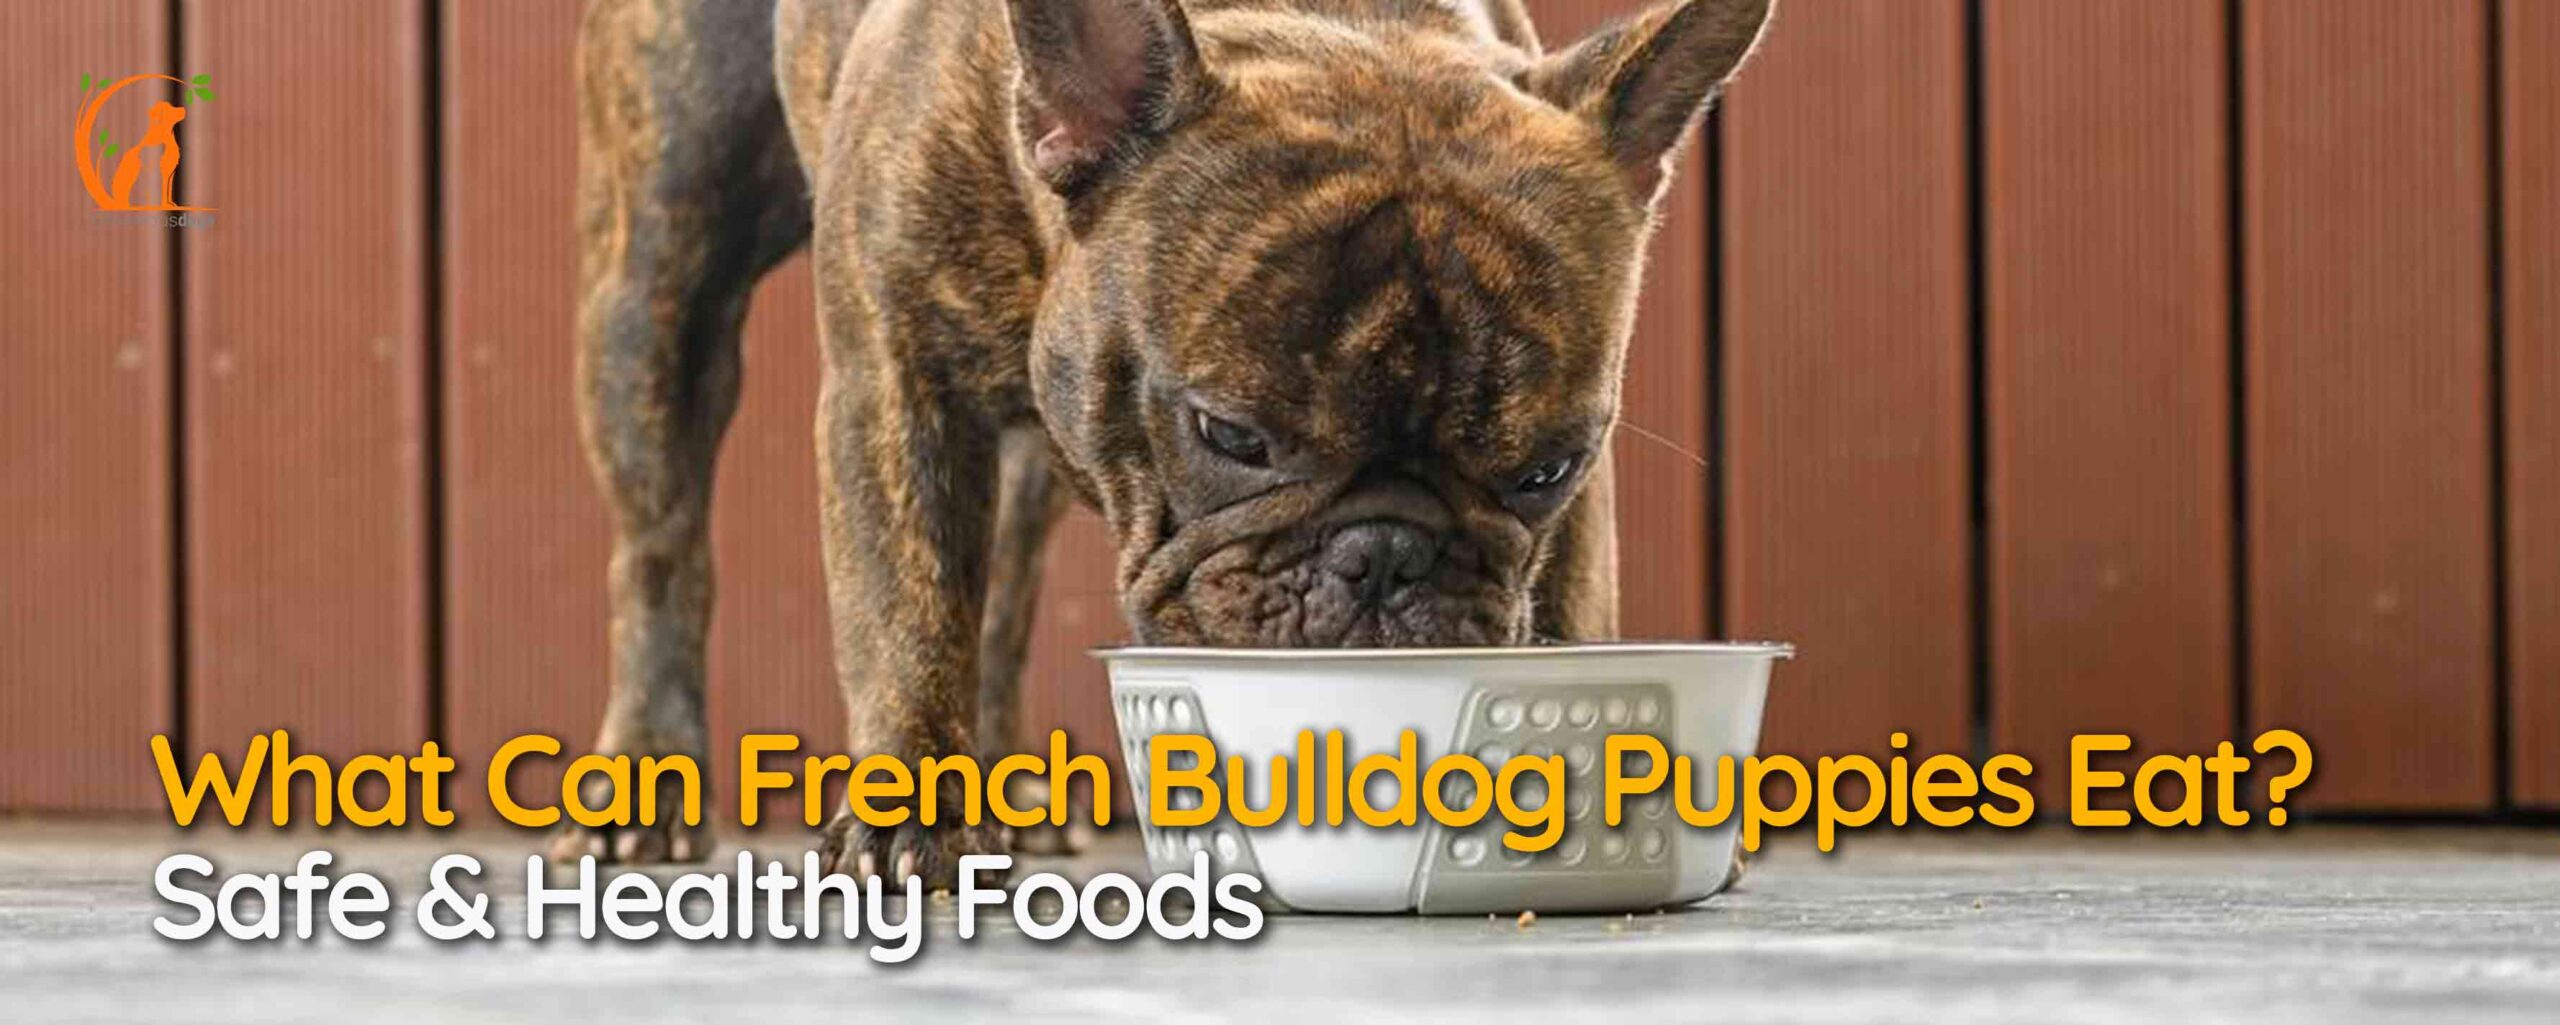 What Can French Bulldog Puppies Eat? Safe & Healthy Foods